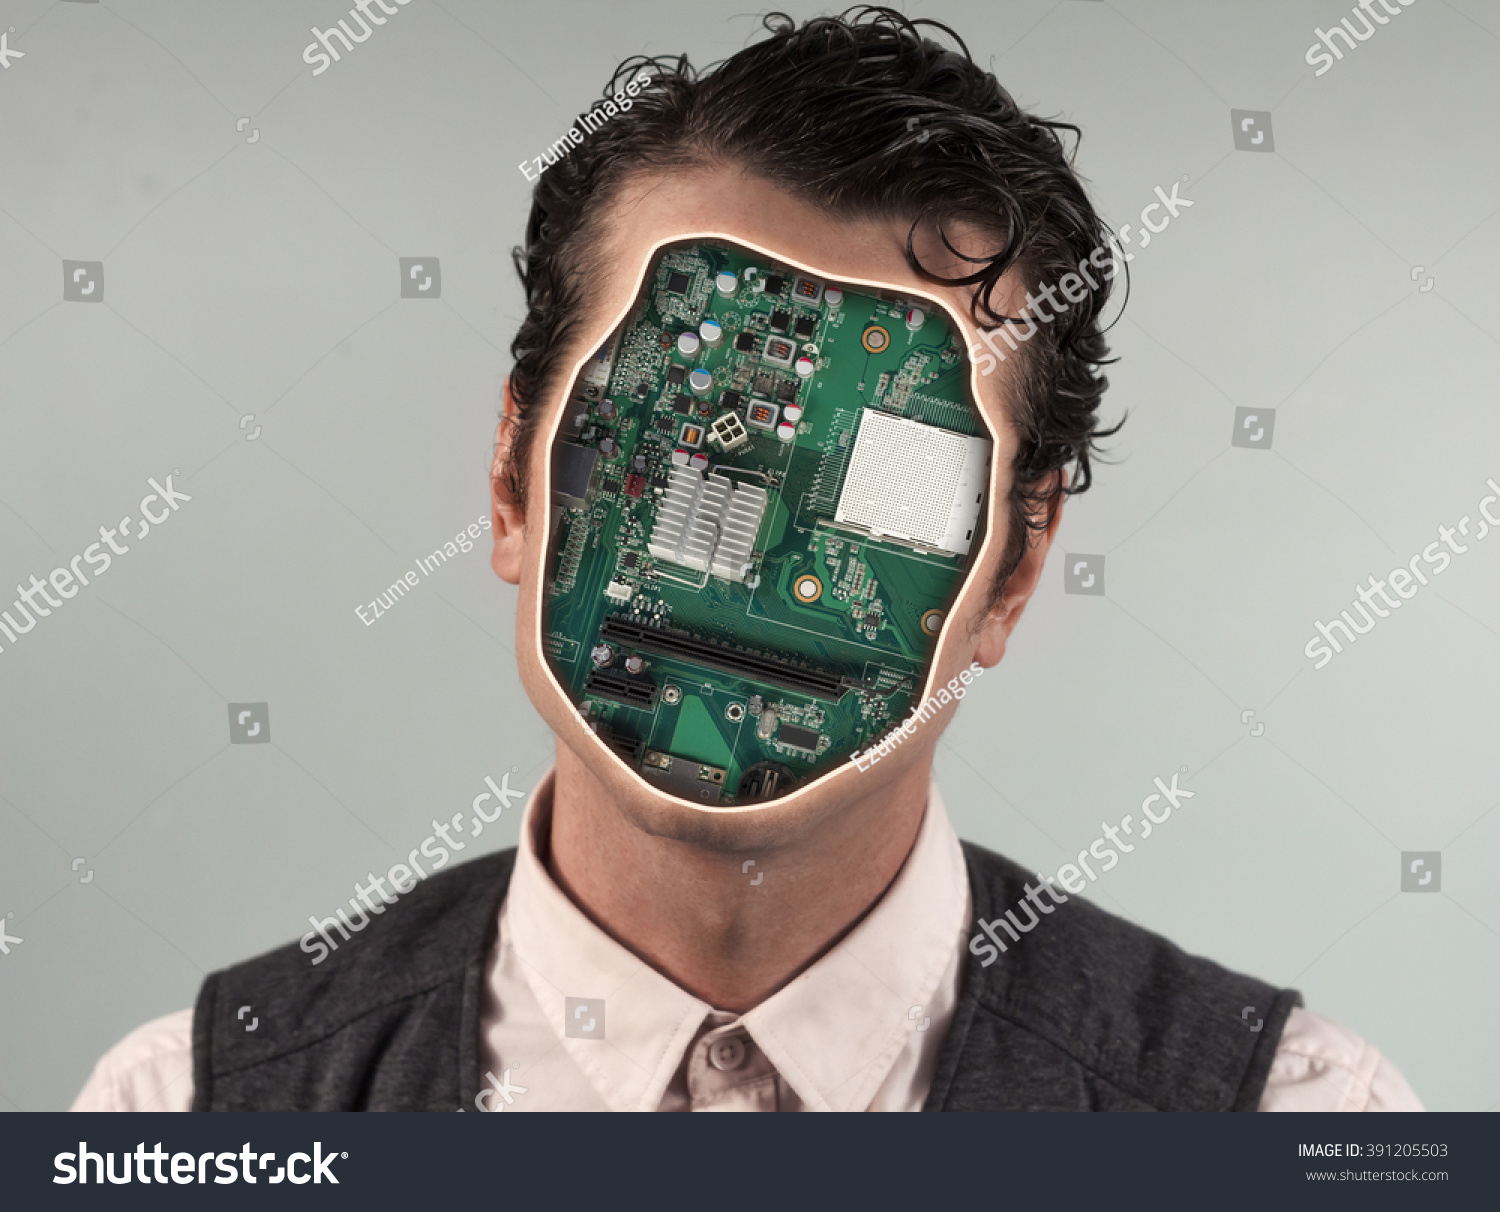 Human cyborg robot with anonymous circuit board face #391205503